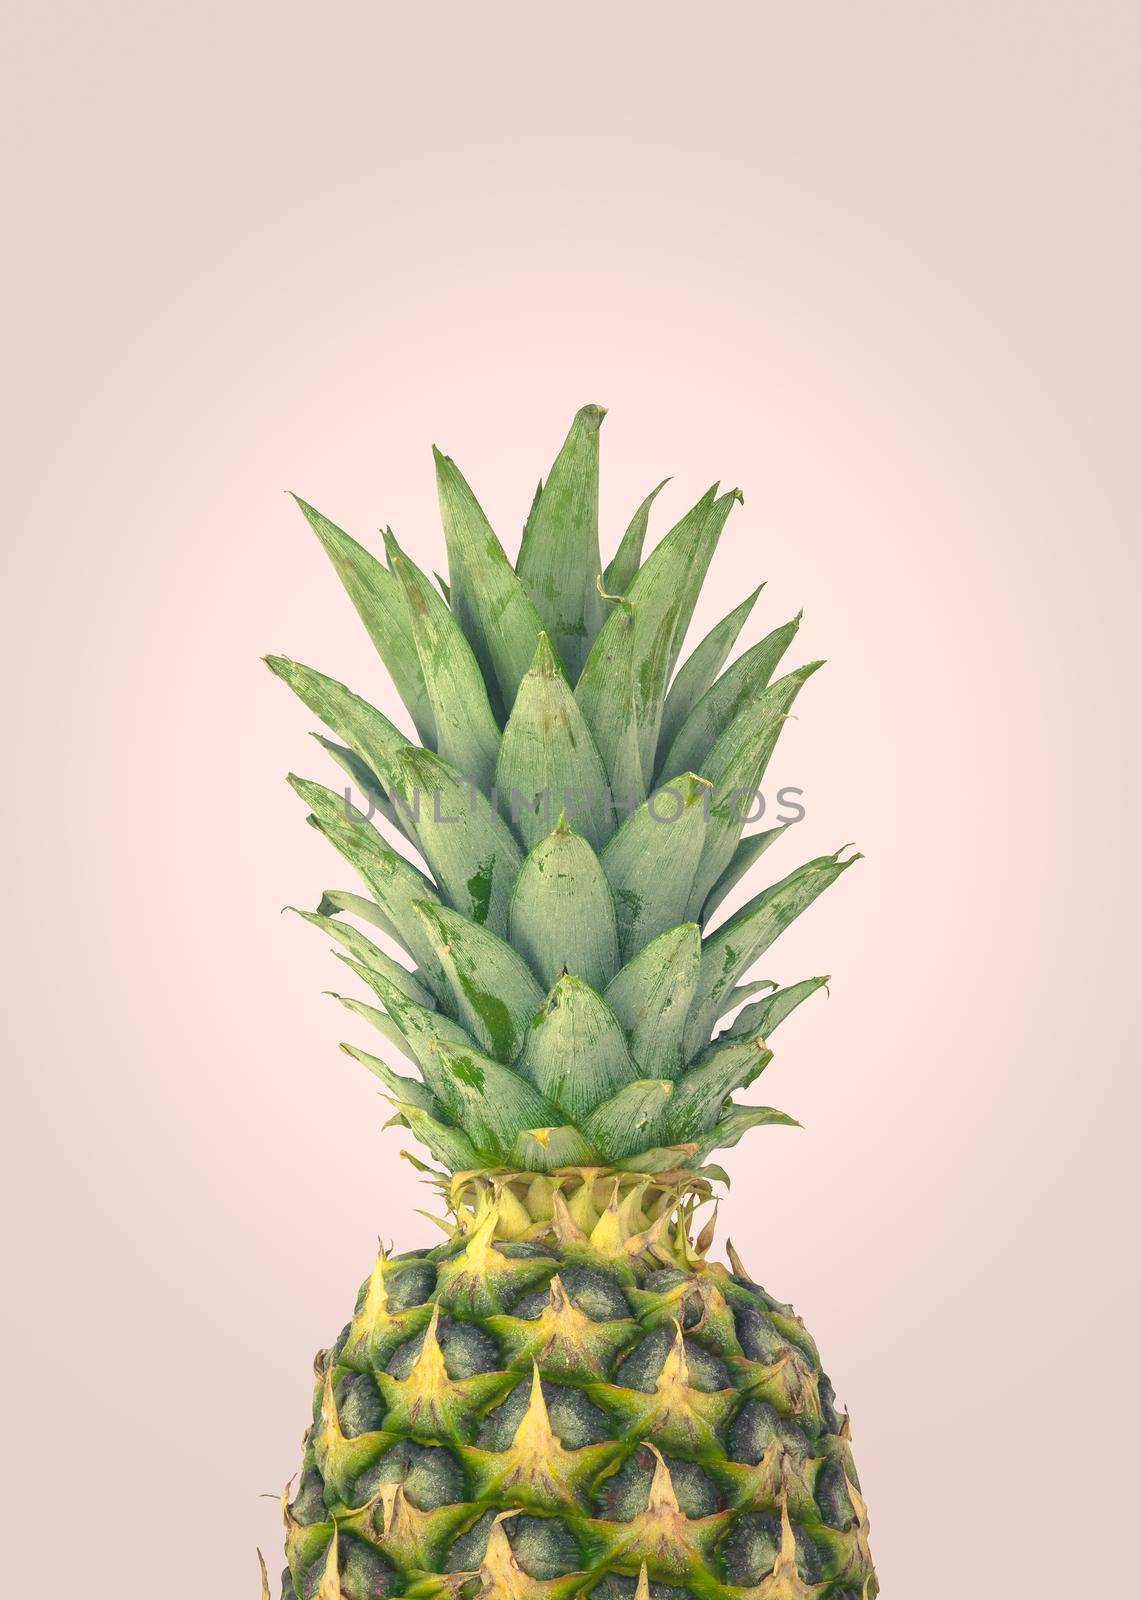 A Fresh Organic Pineapple On A Pastel Pink Background